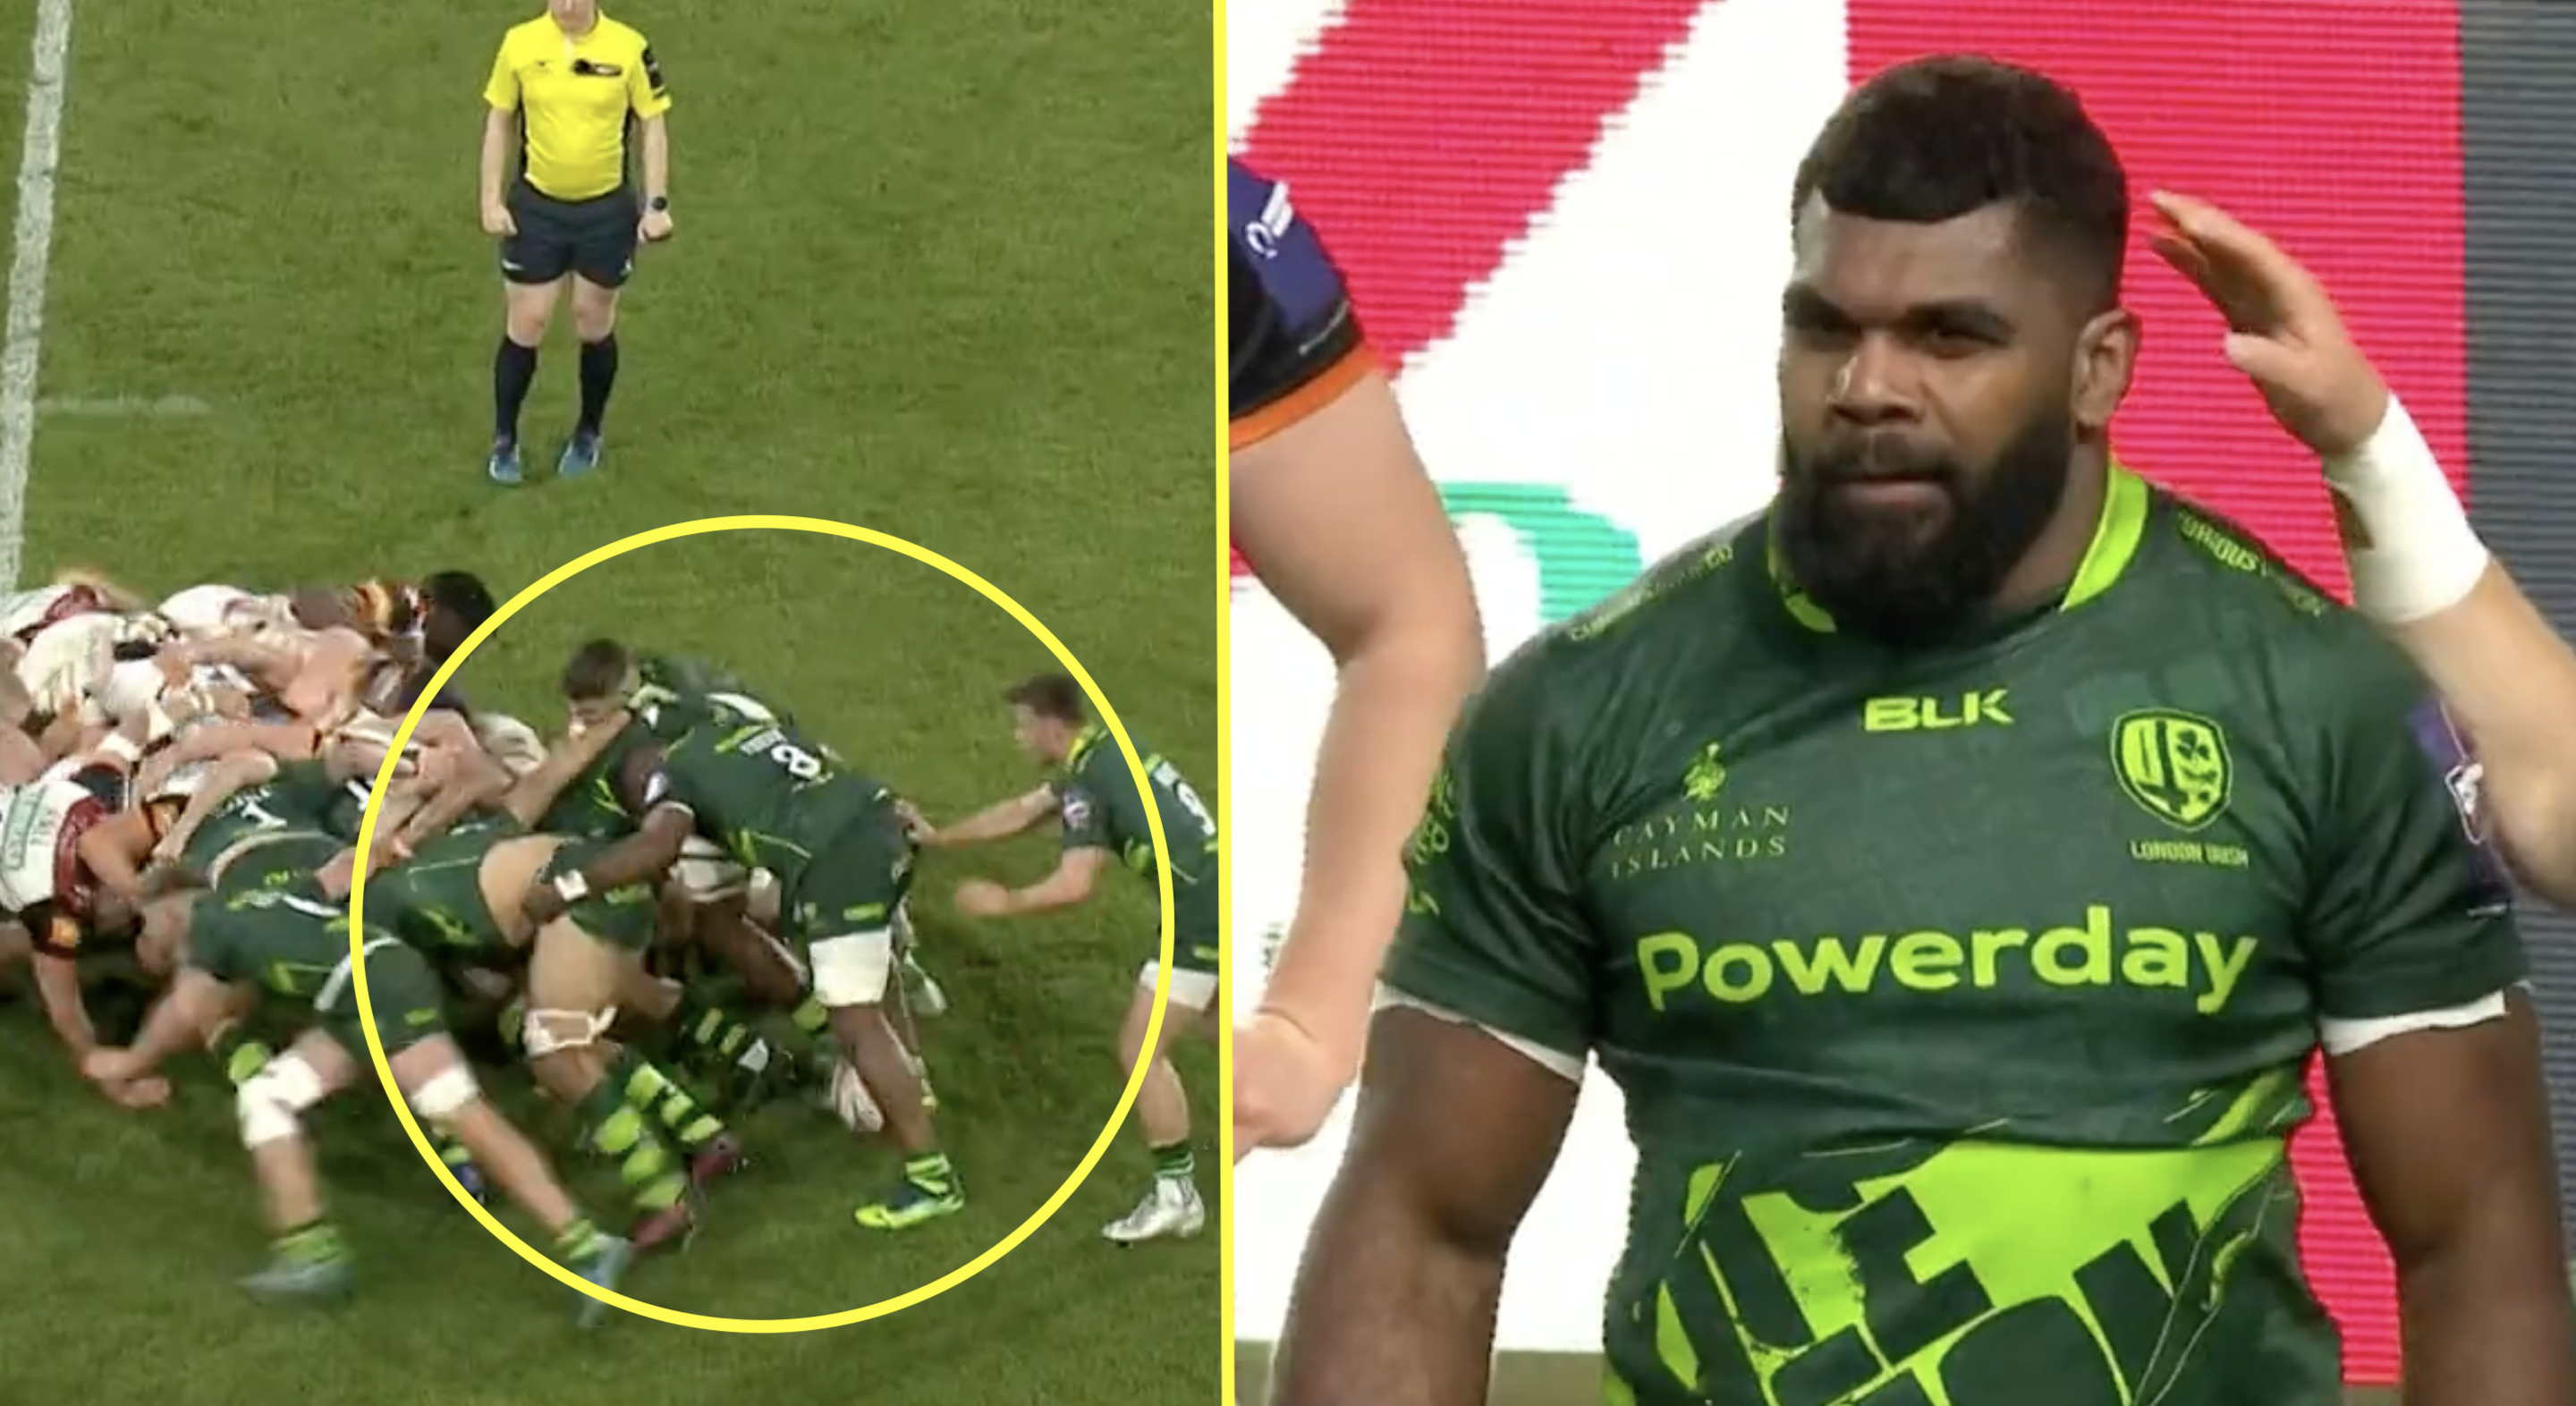 No8 pulls off scrum offload very few on Earth can